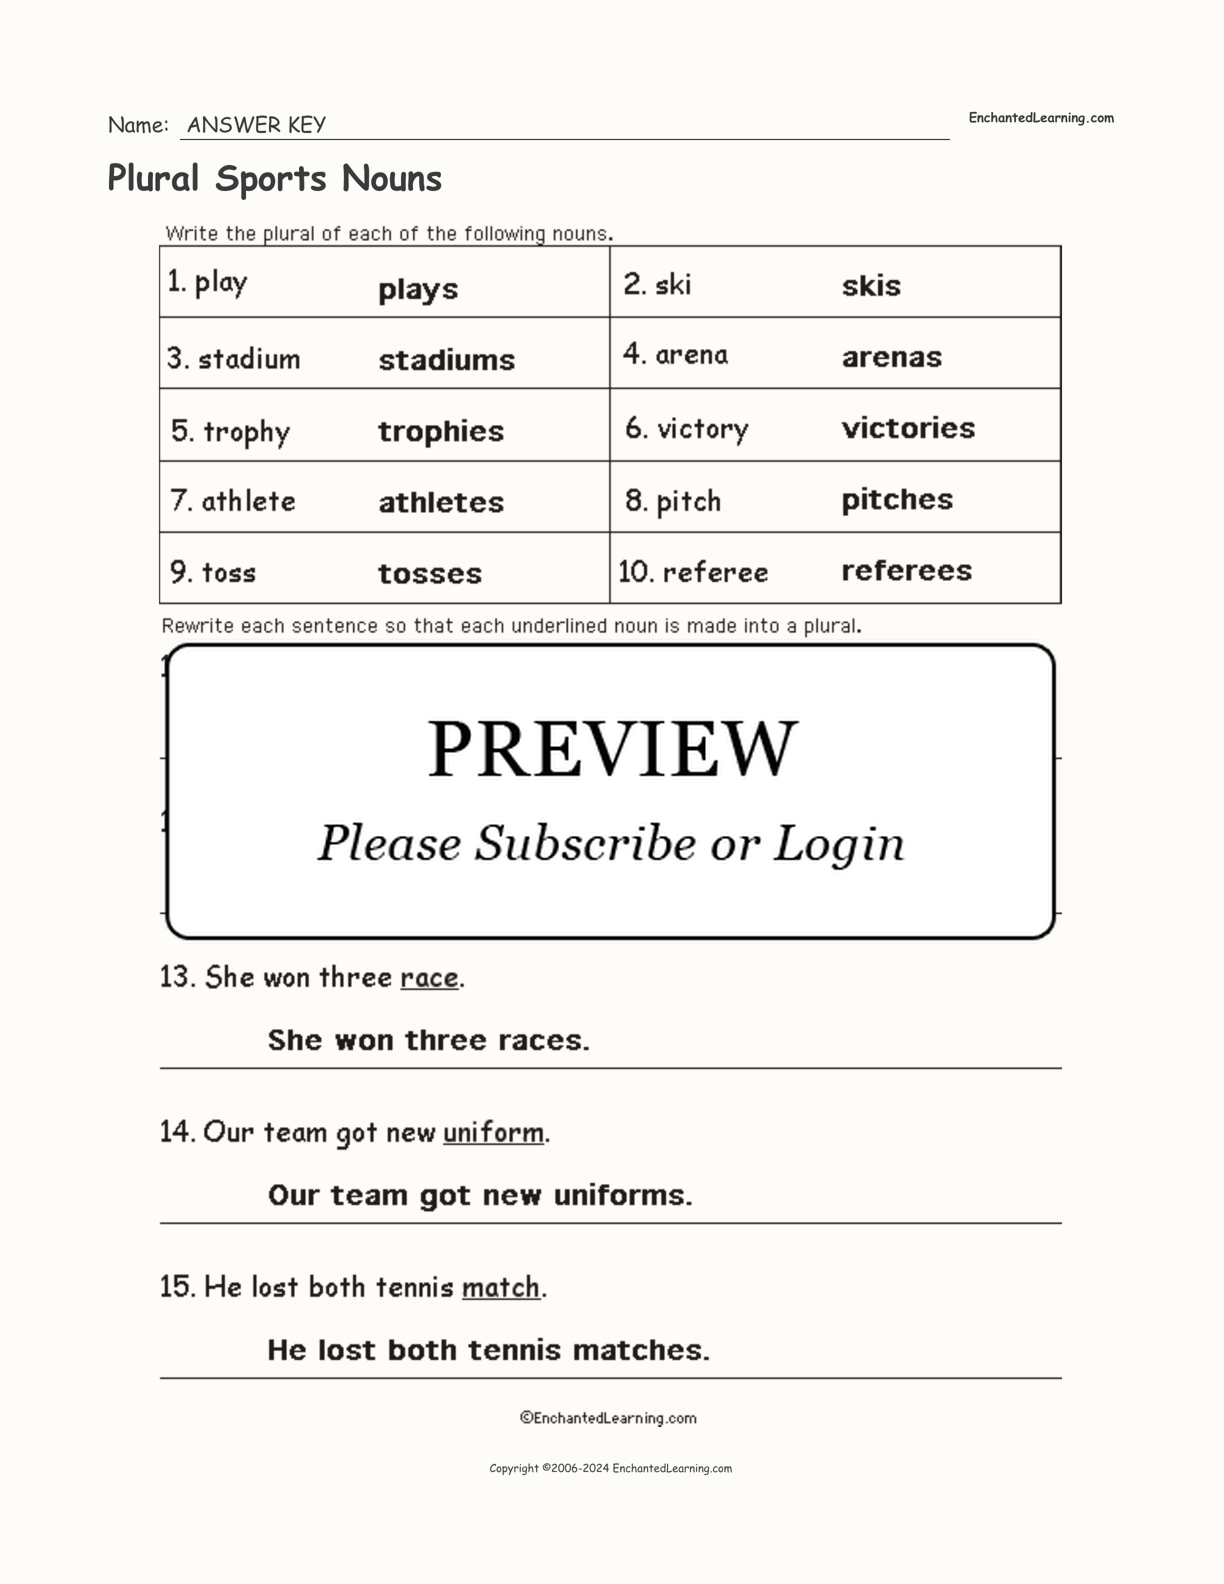 Plural Sports Nouns interactive worksheet page 2